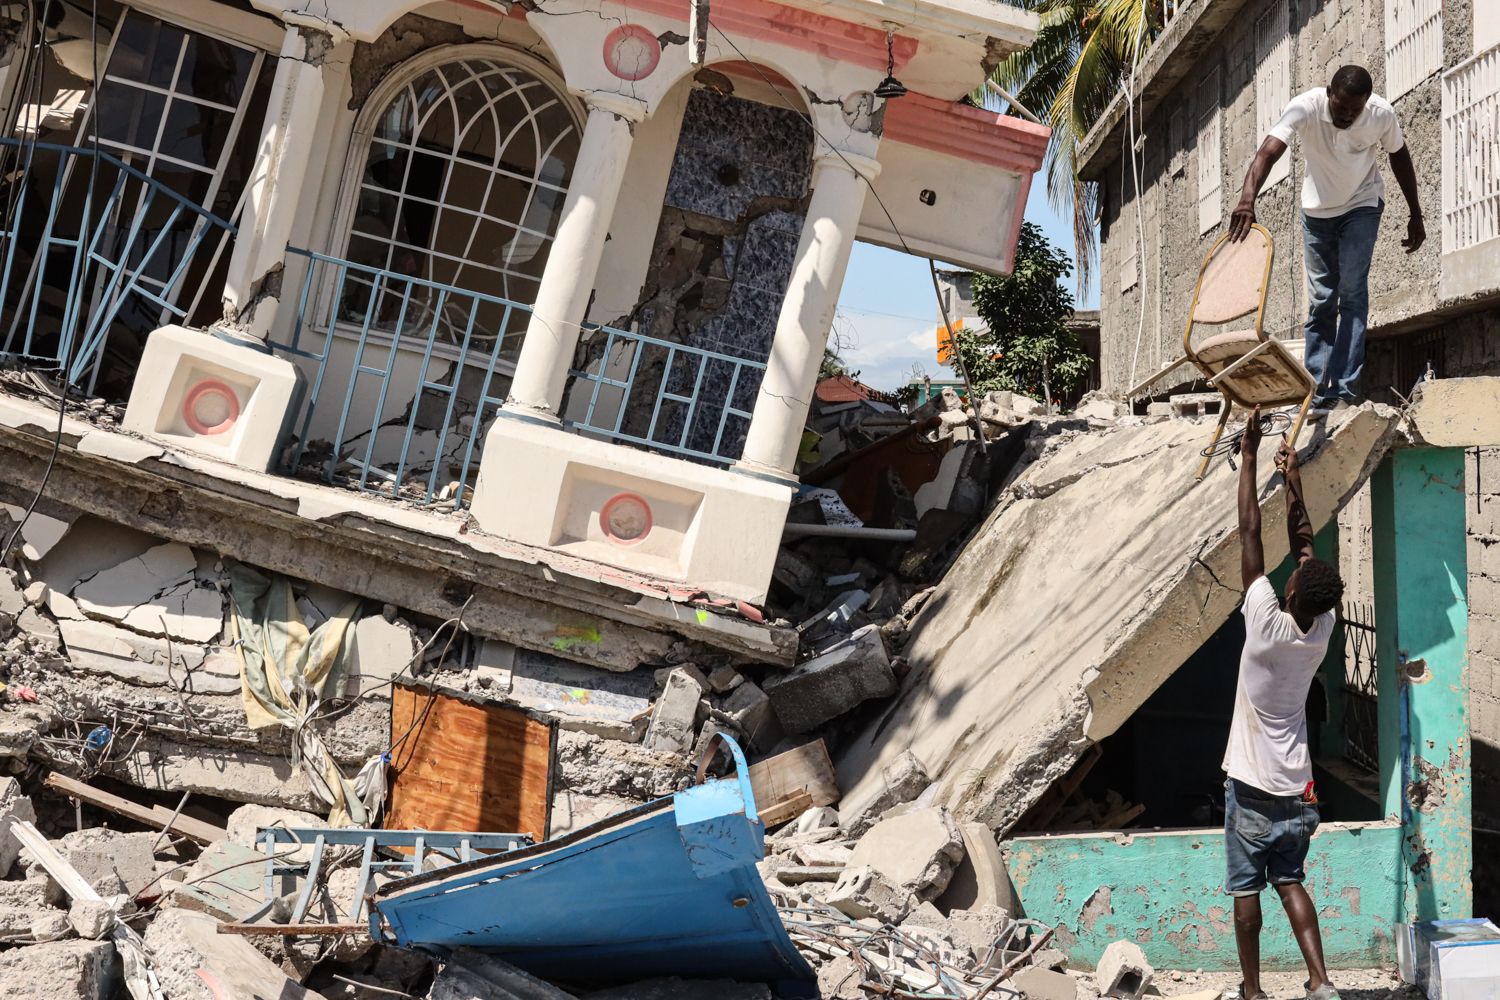 Death Toll Soars from Haiti Earthquake; U.S. Deploys Search and Rescue